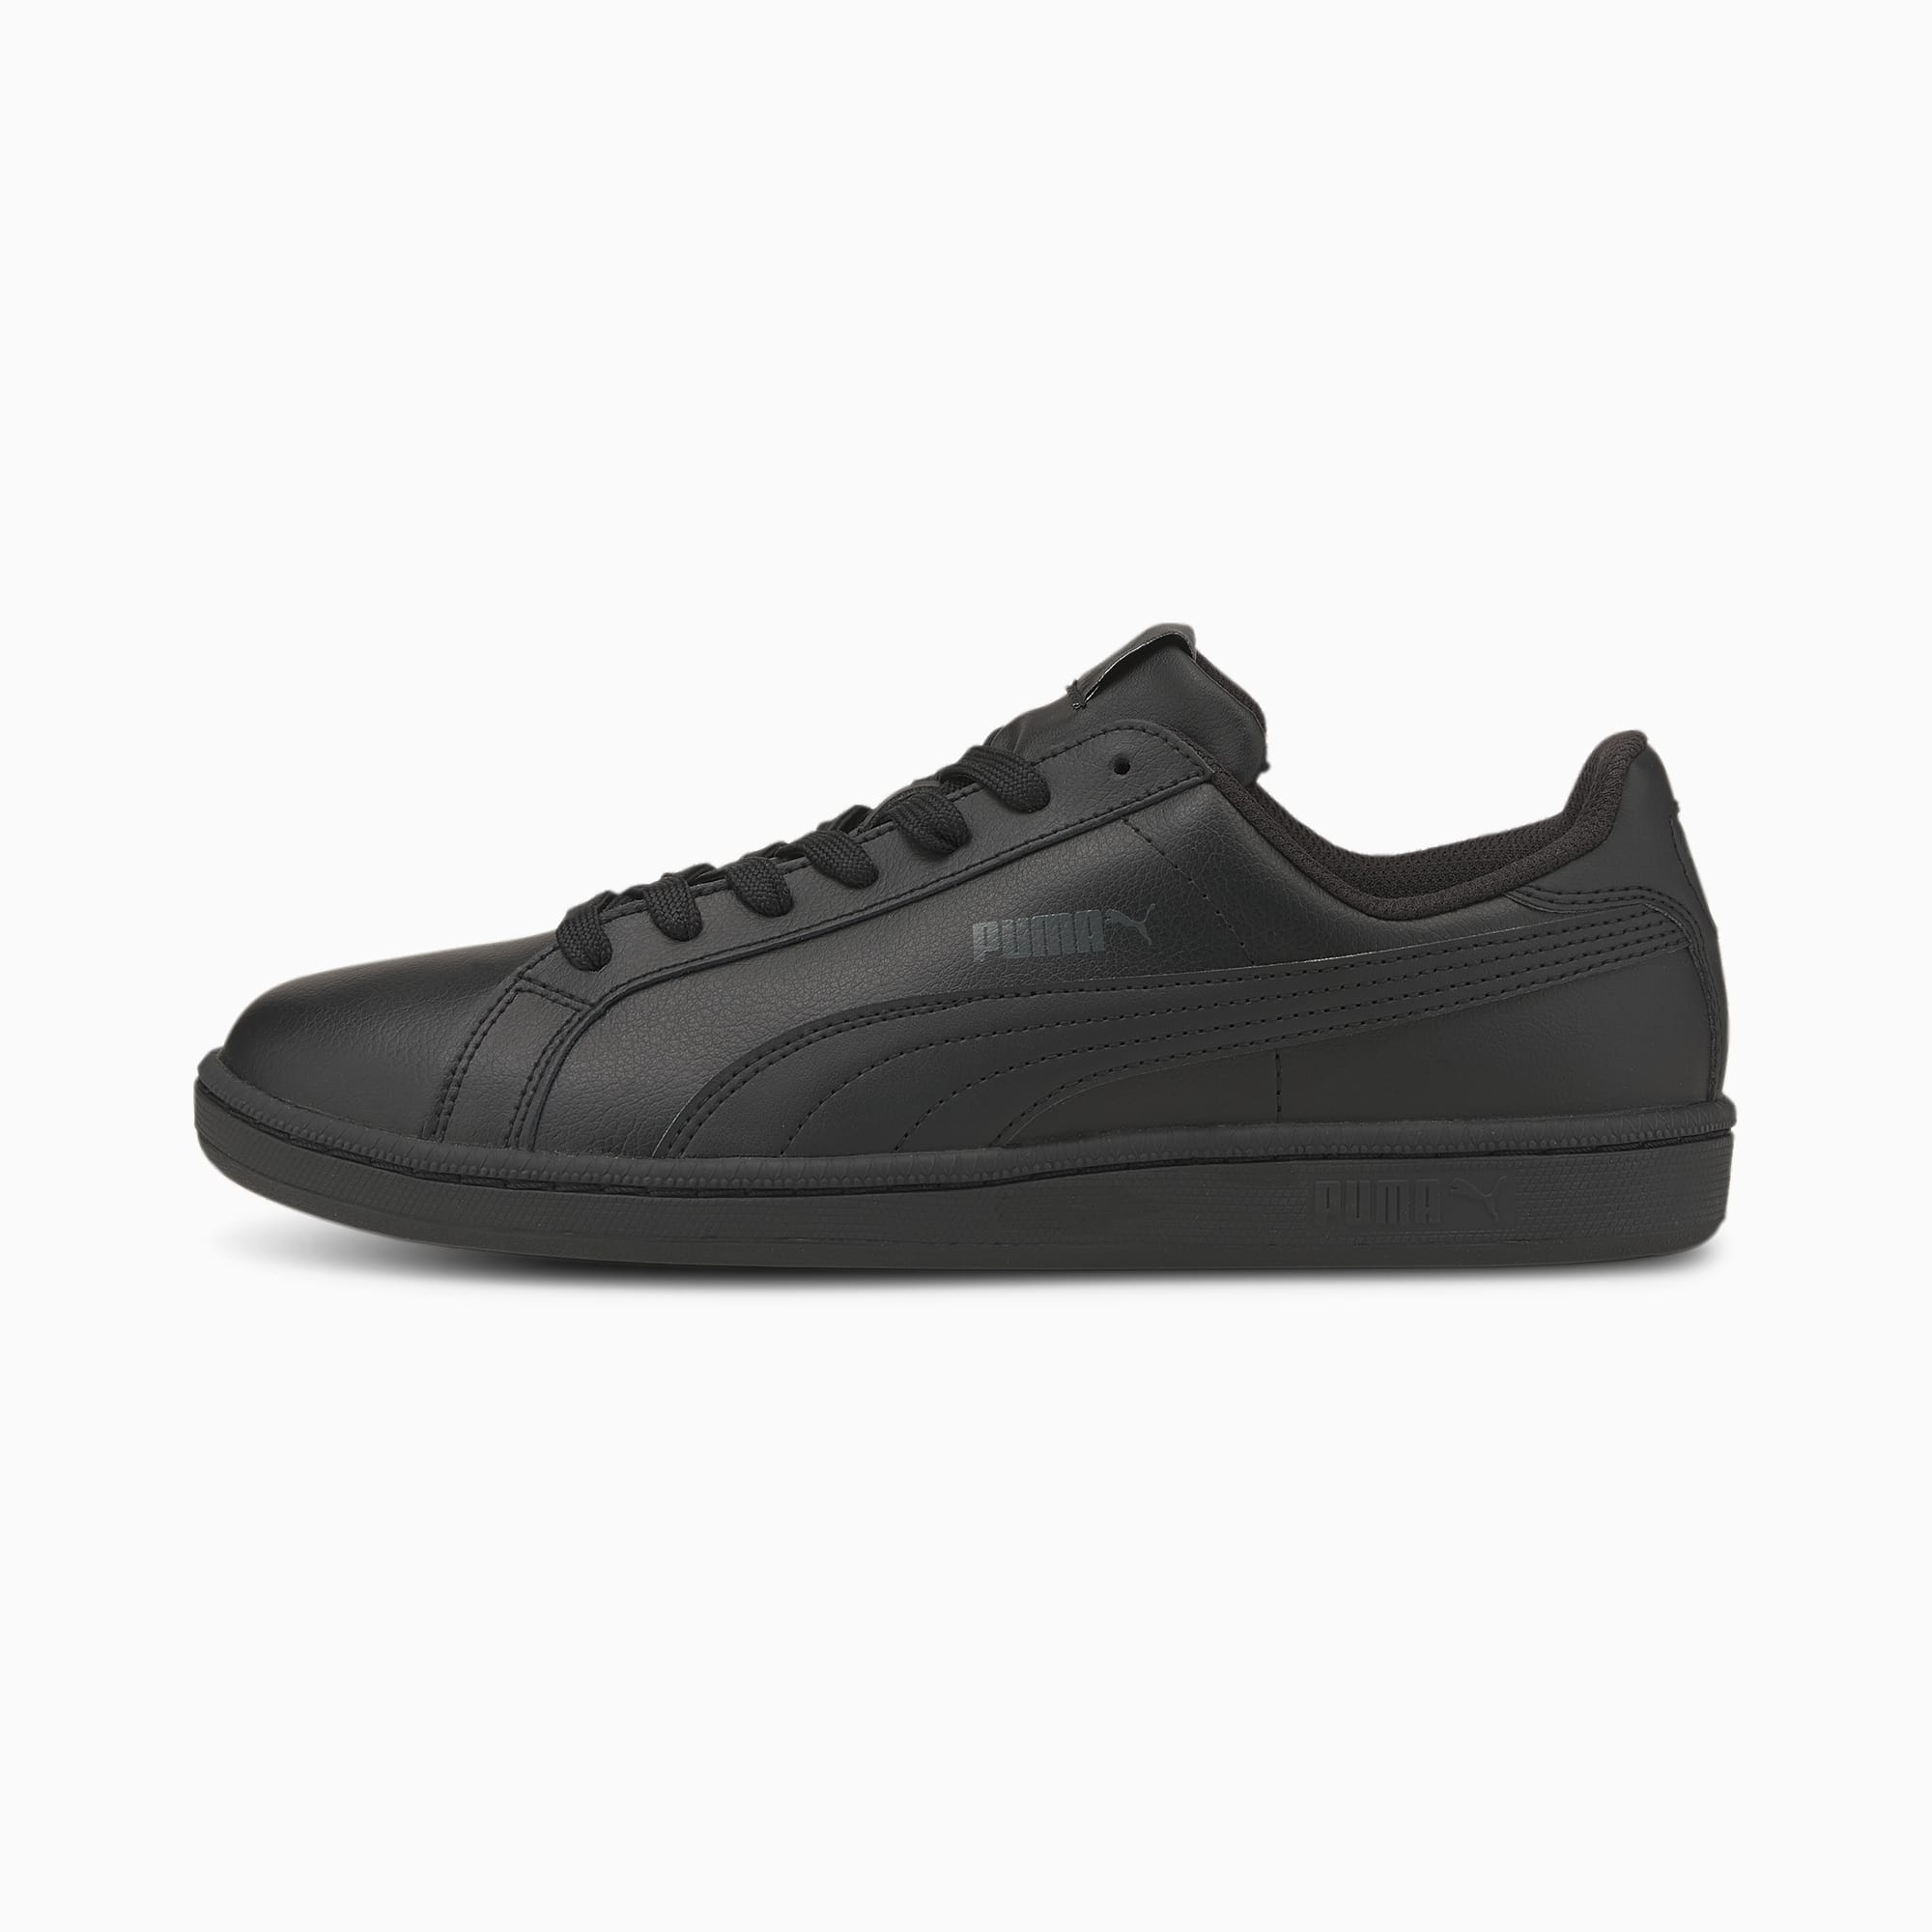 Puma Leather Shoes | vlr.eng.br